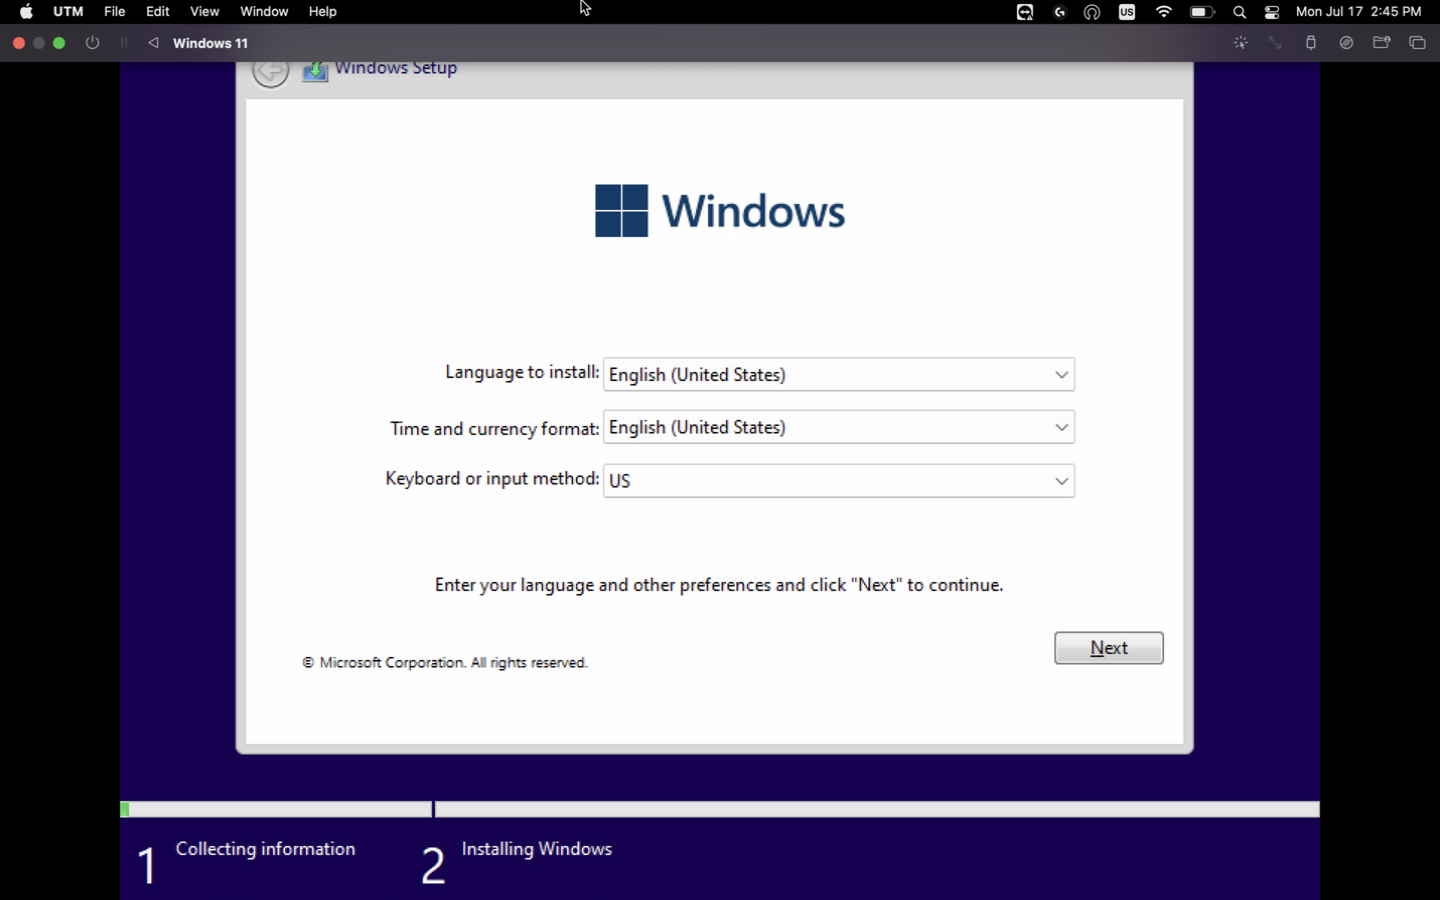 Installing the Windows OS on the VM 